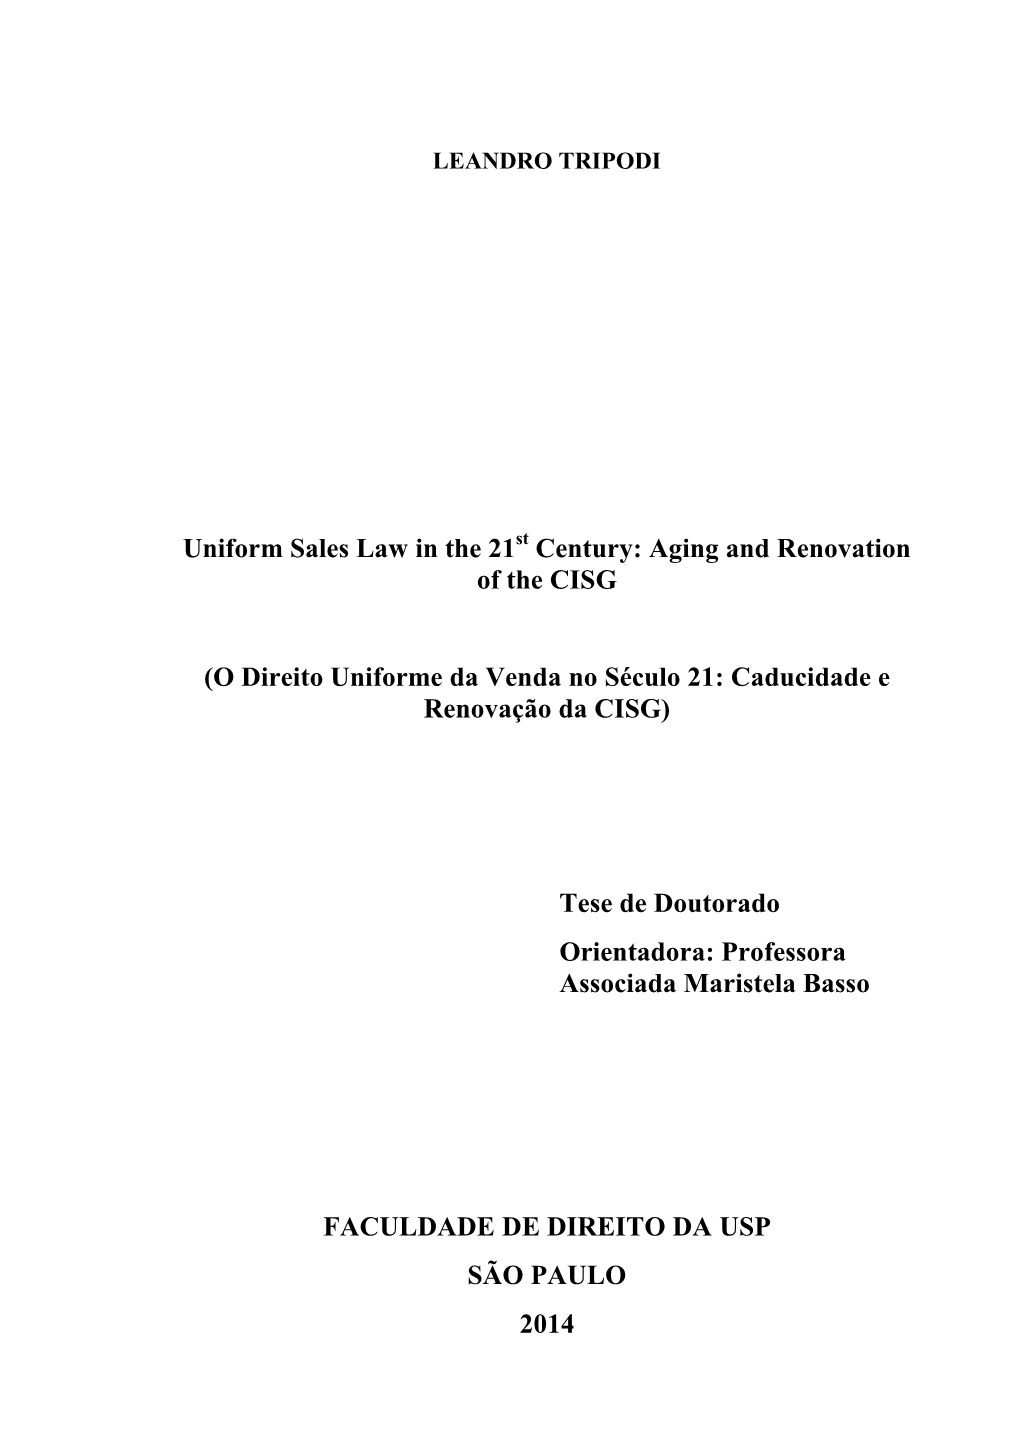 Uniform Sales Law in the 21 Century: Aging and Renovation of the CISG